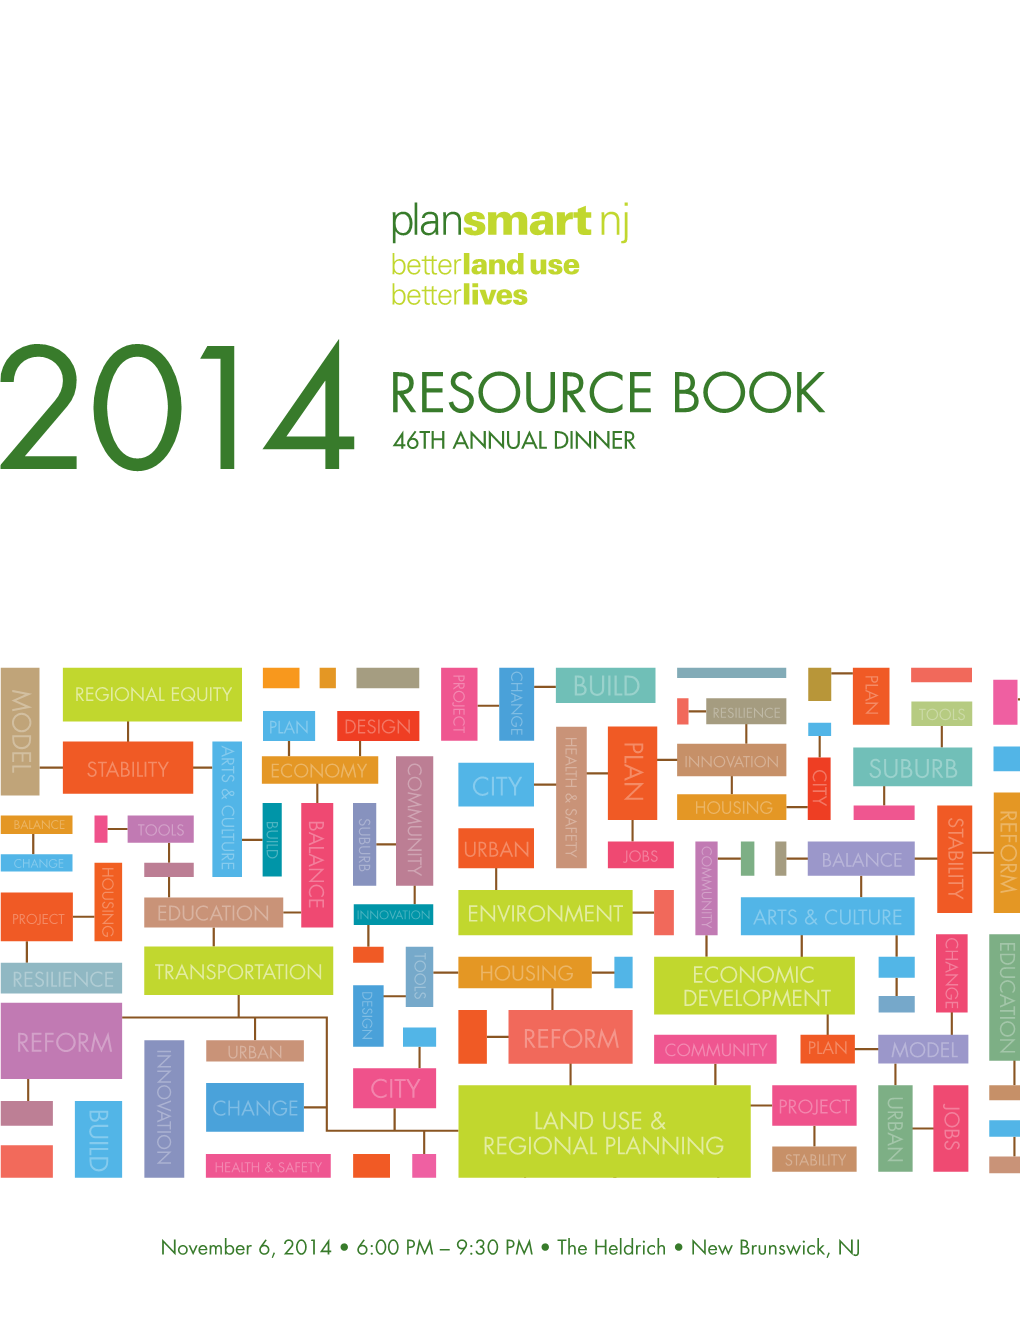 Resource Book 2014 46Th Annual Dinner Change Project Plan Model Regional Equity Build Resilience Tools